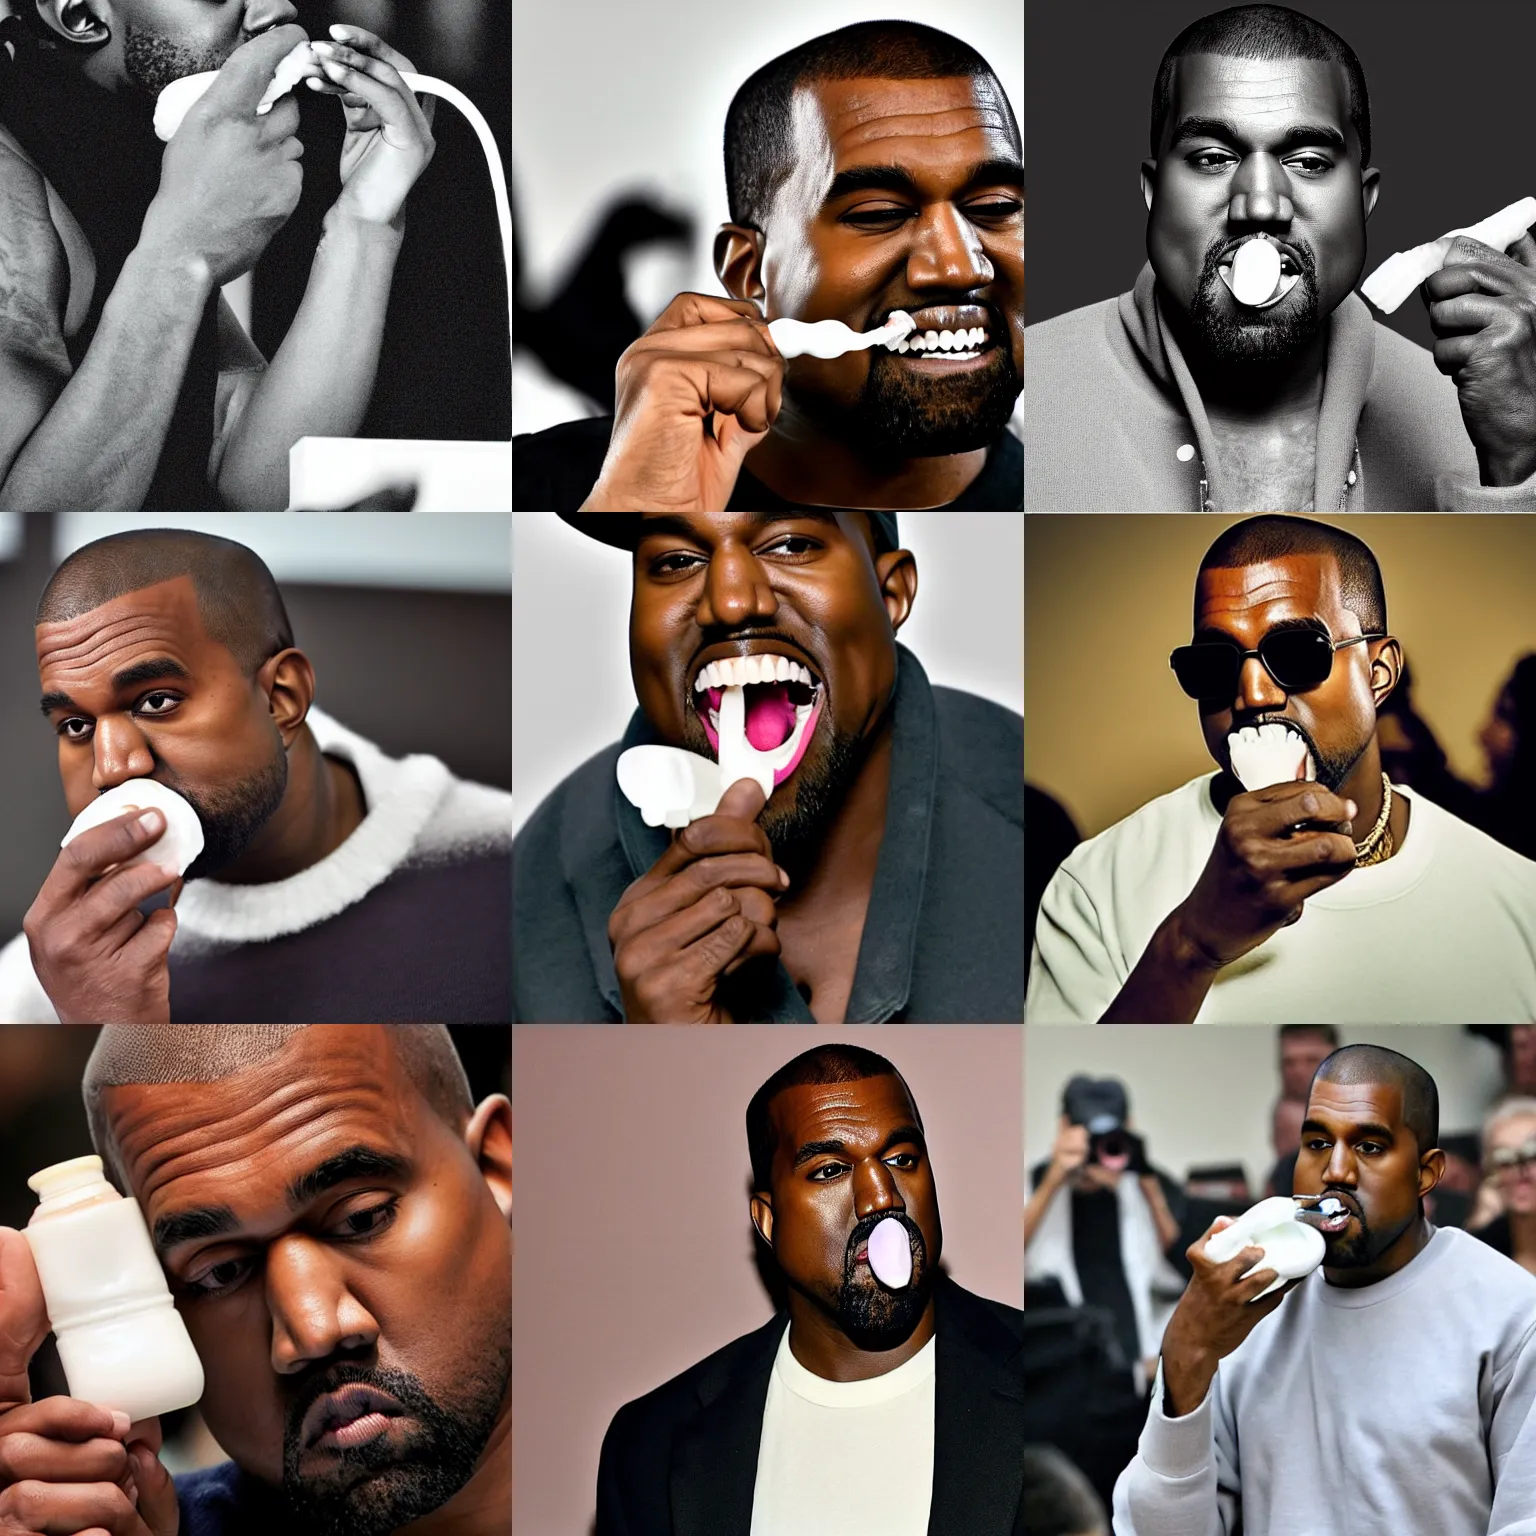 kanye west drinking toothpaste by squeezing a tube of | Stable ...